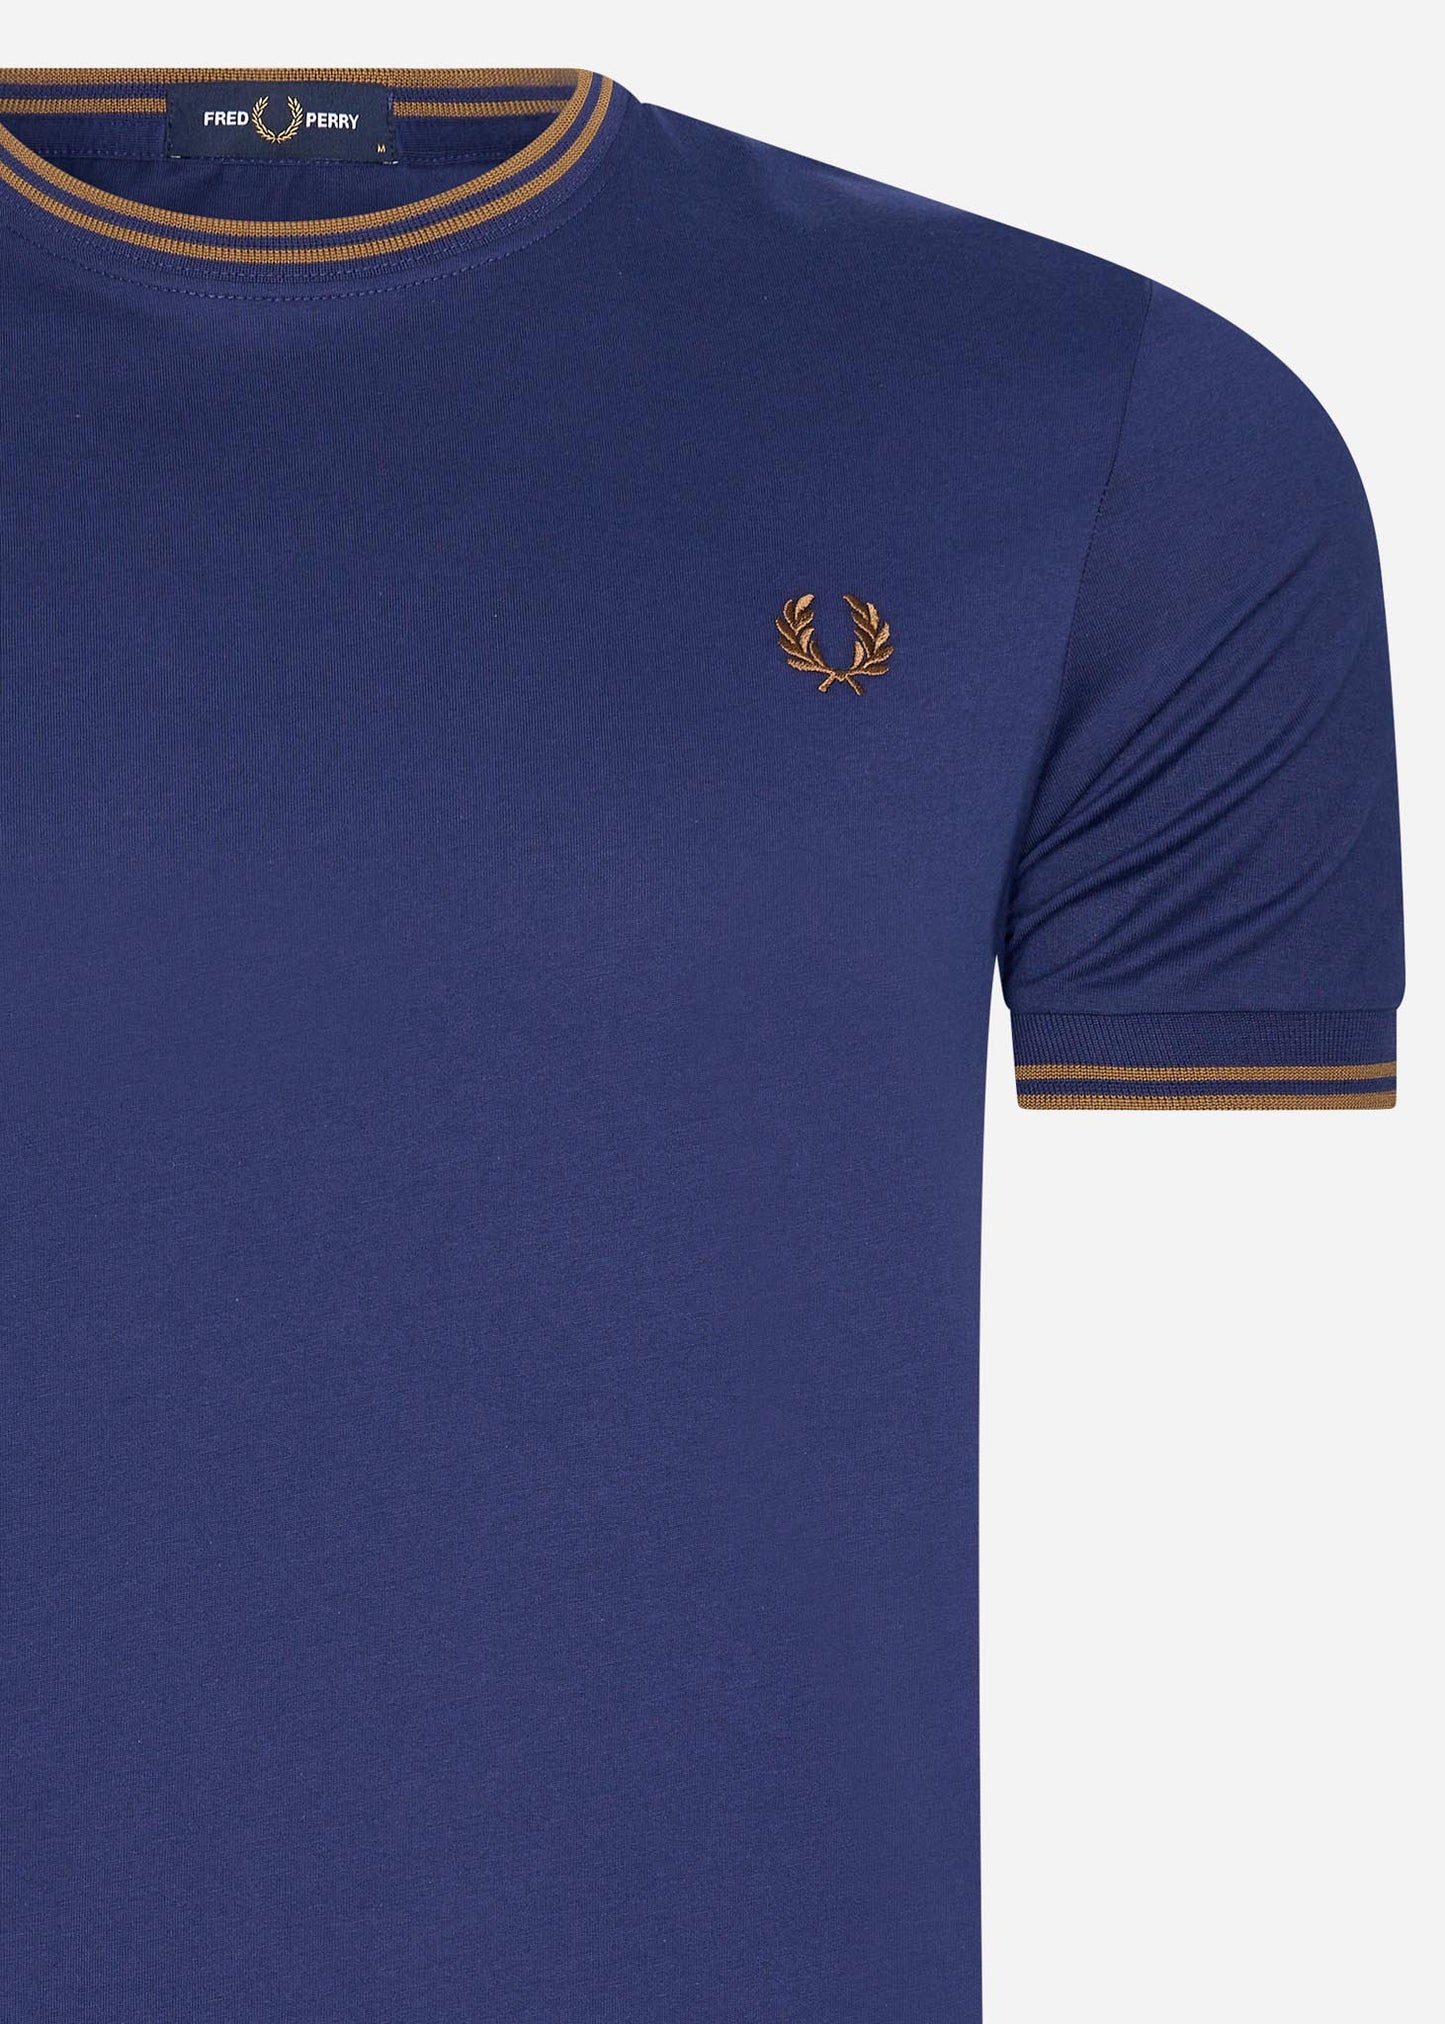 fred perry t-shirt tipped french navy